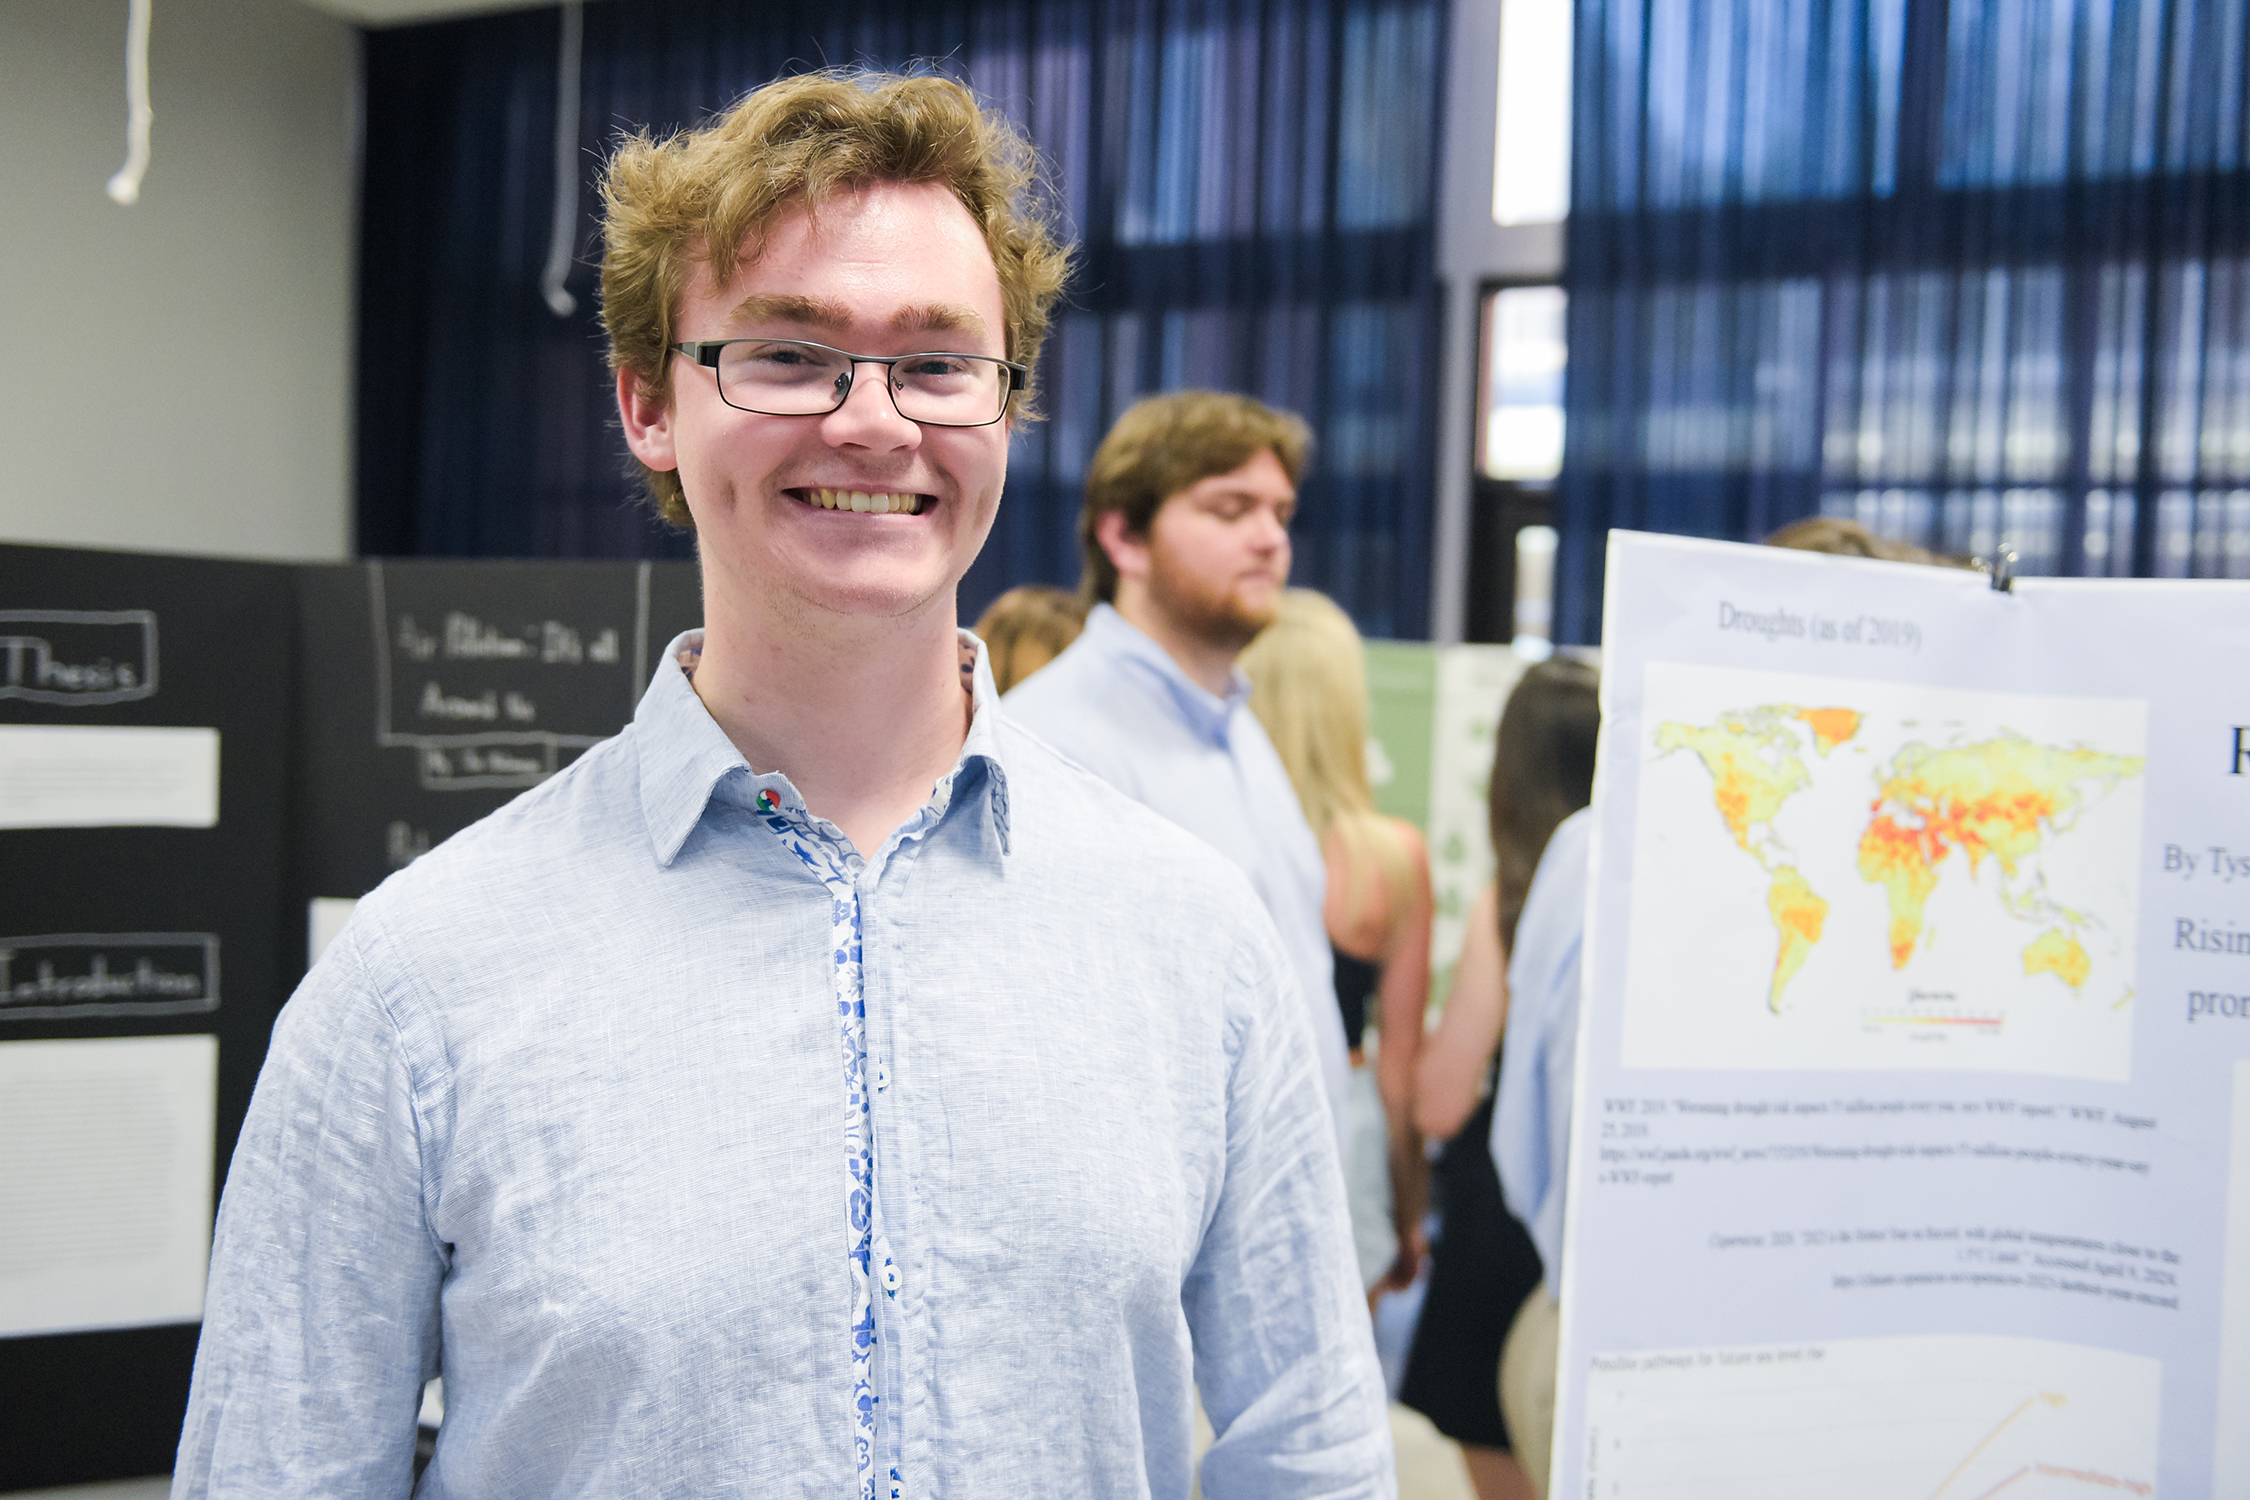 Will Turner stands near his final project "Reshaping the land: Rising and receding water," that he completed with the help of three classmates. Students described their project during the Sustainability Symposium leading up to Earth Day.